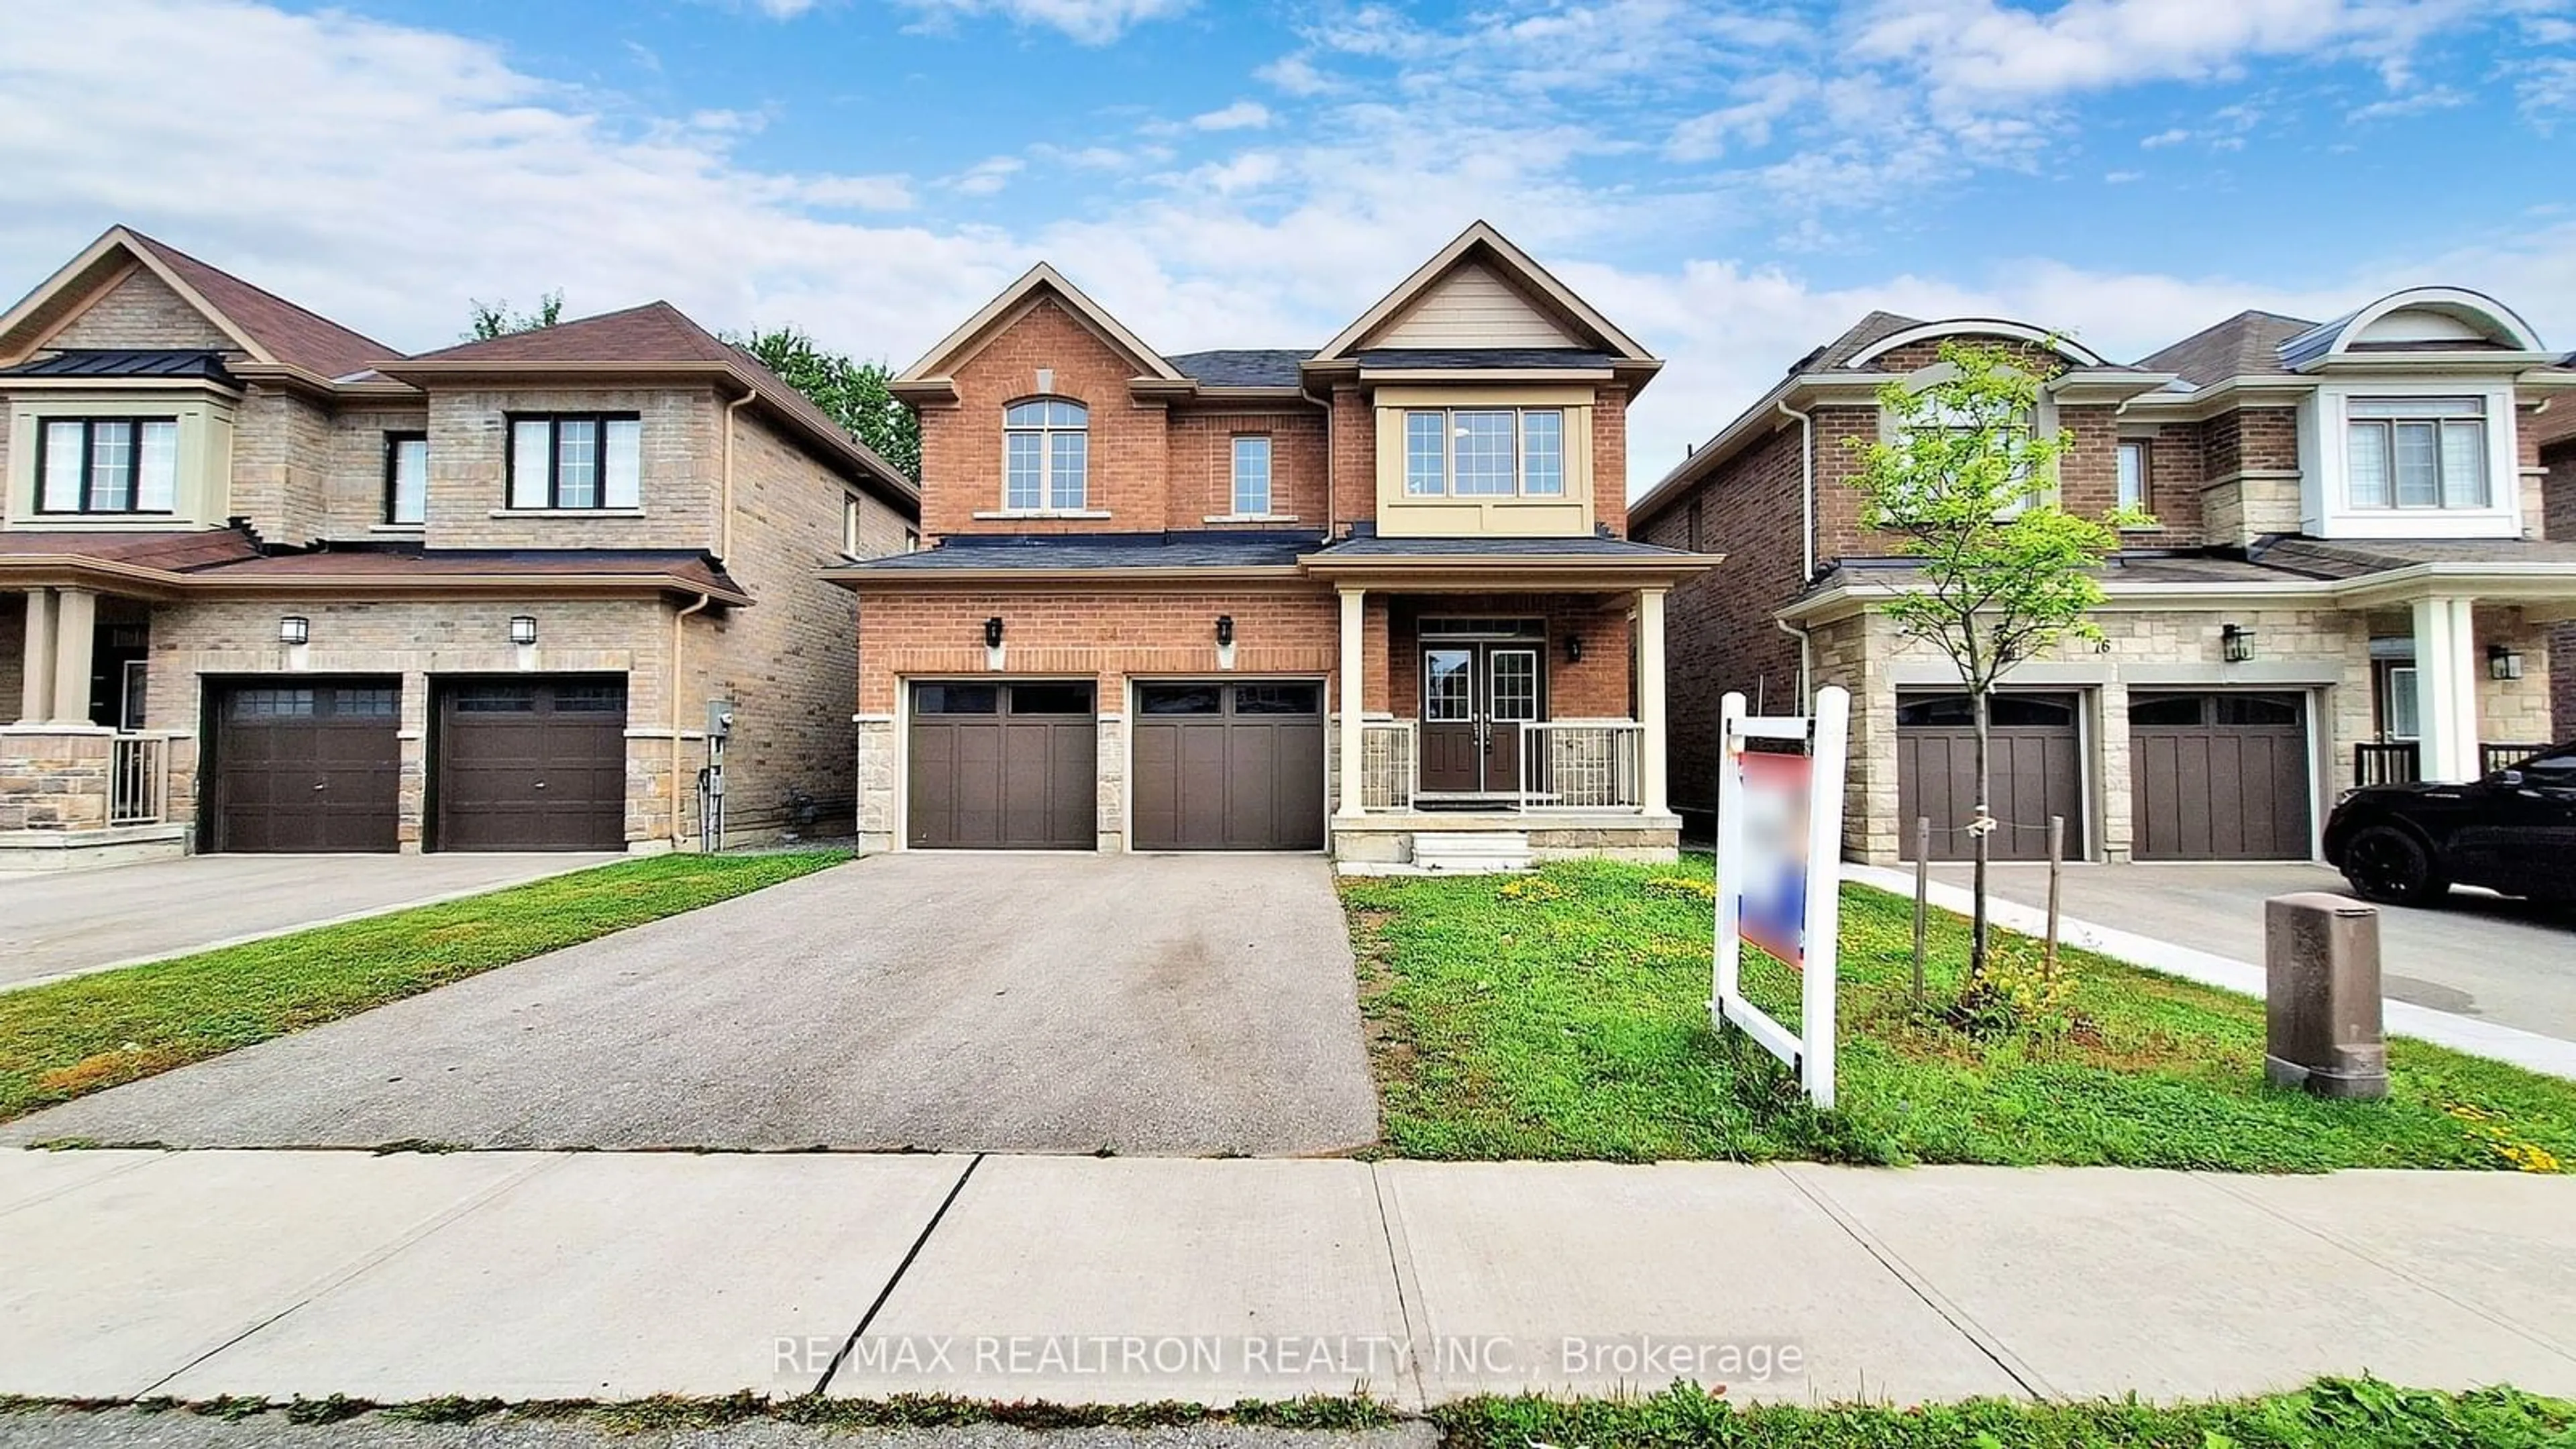 Home with brick exterior material for 74 Robb Thompson Rd, East Gwillimbury Ontario L0G 1M0